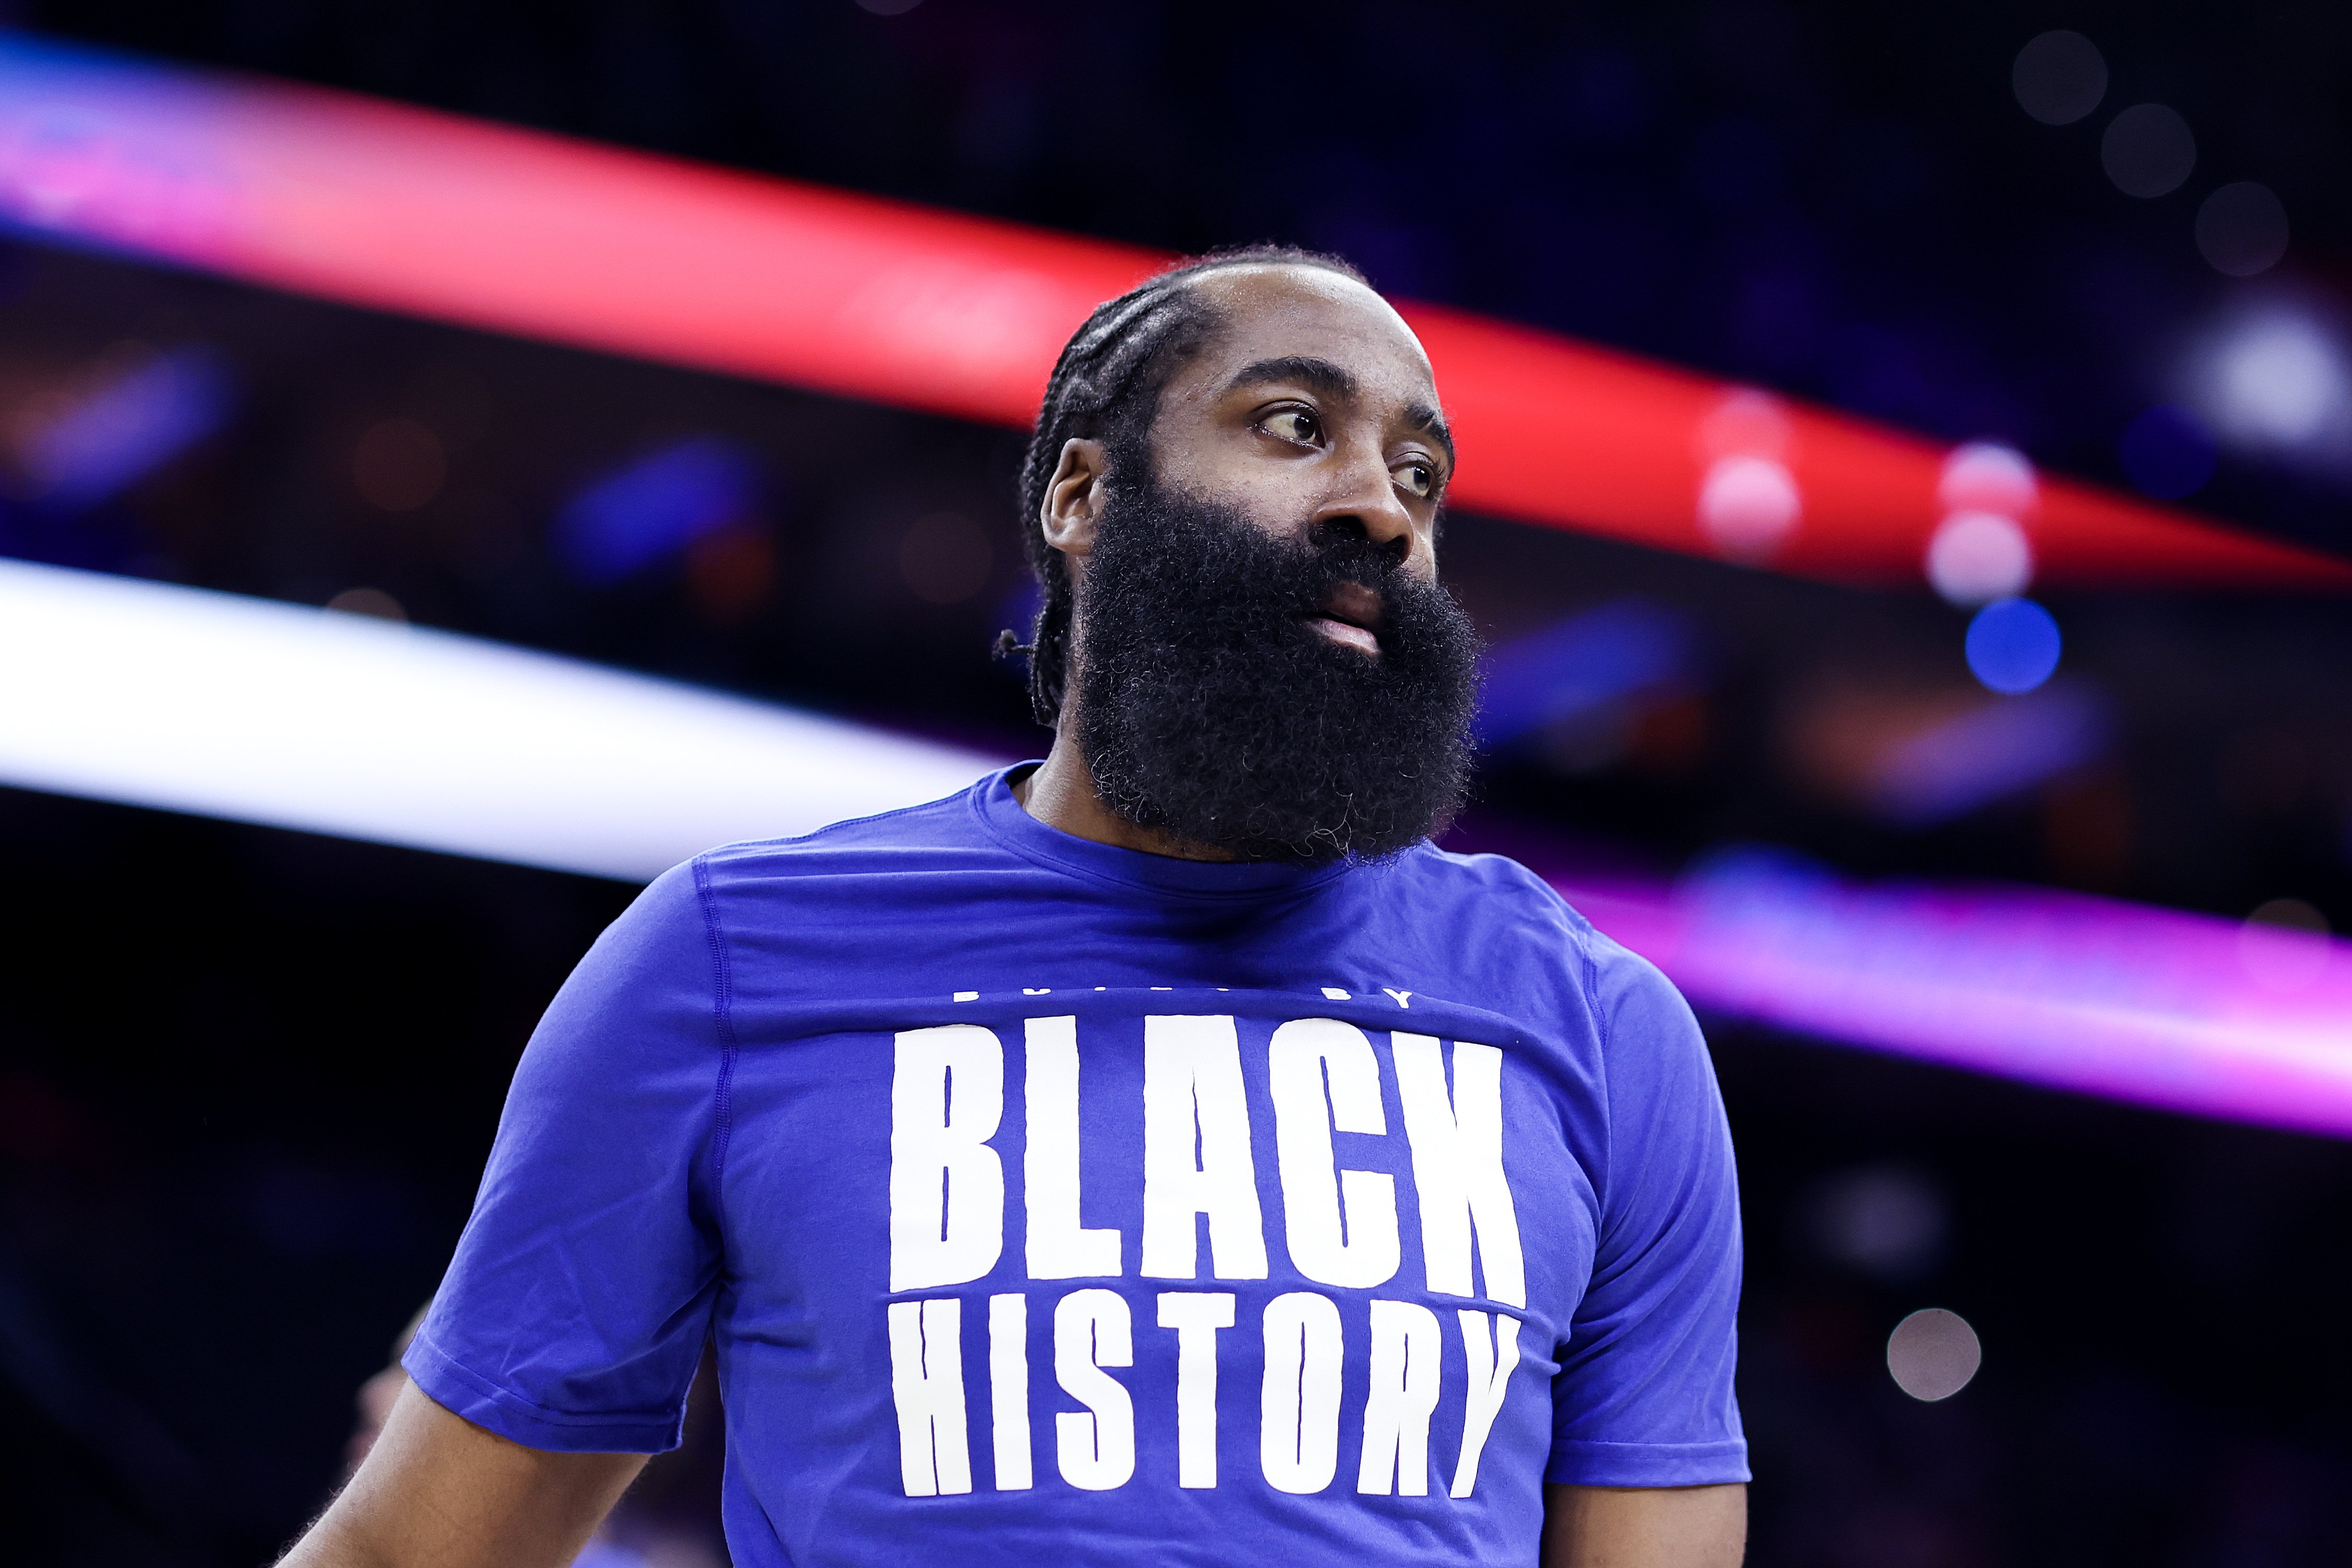 James Harden warming up before he takes the field for Philadelphia 76ers at Wells Fargo Center in Philadelphia, Pennsylvania, on February 01, 2023. | Source: Getty Images